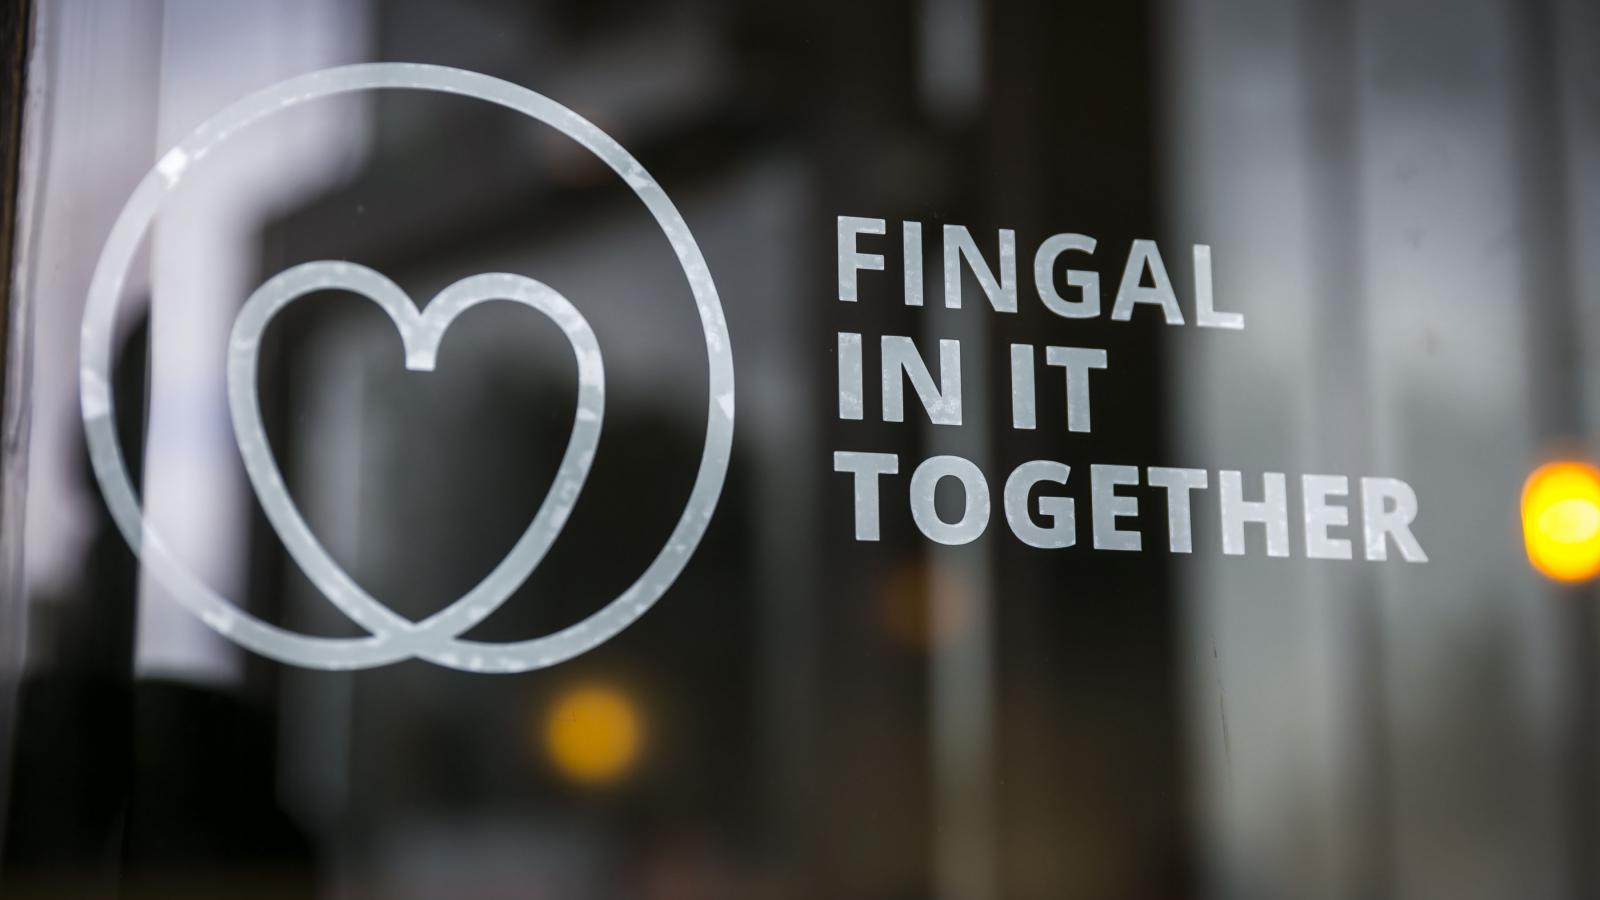 Fingal In It Together